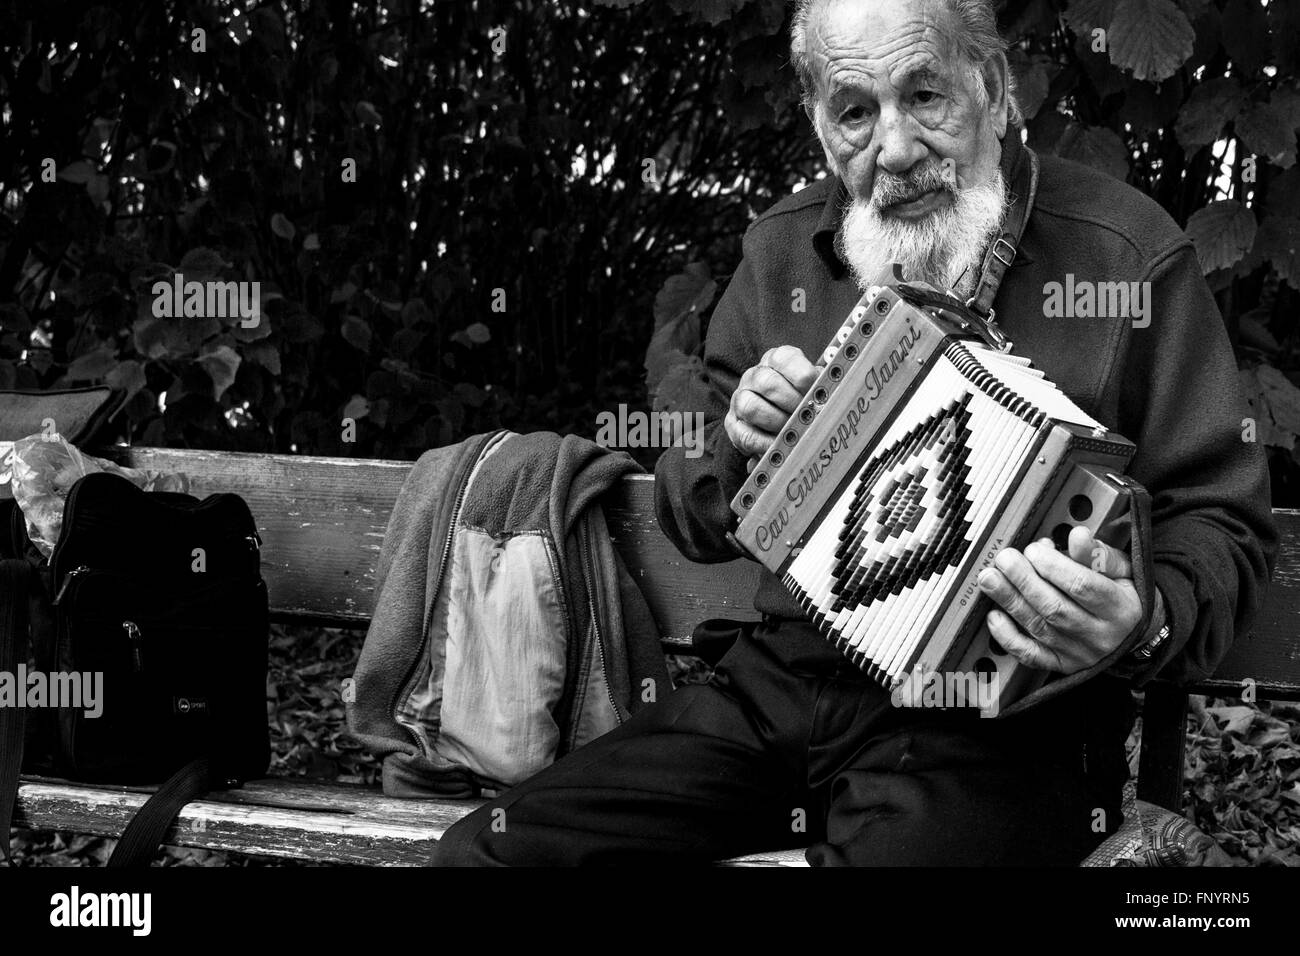 Old man playing music with his instruments on the street. Torino, Italy, 2015. Stock Photo